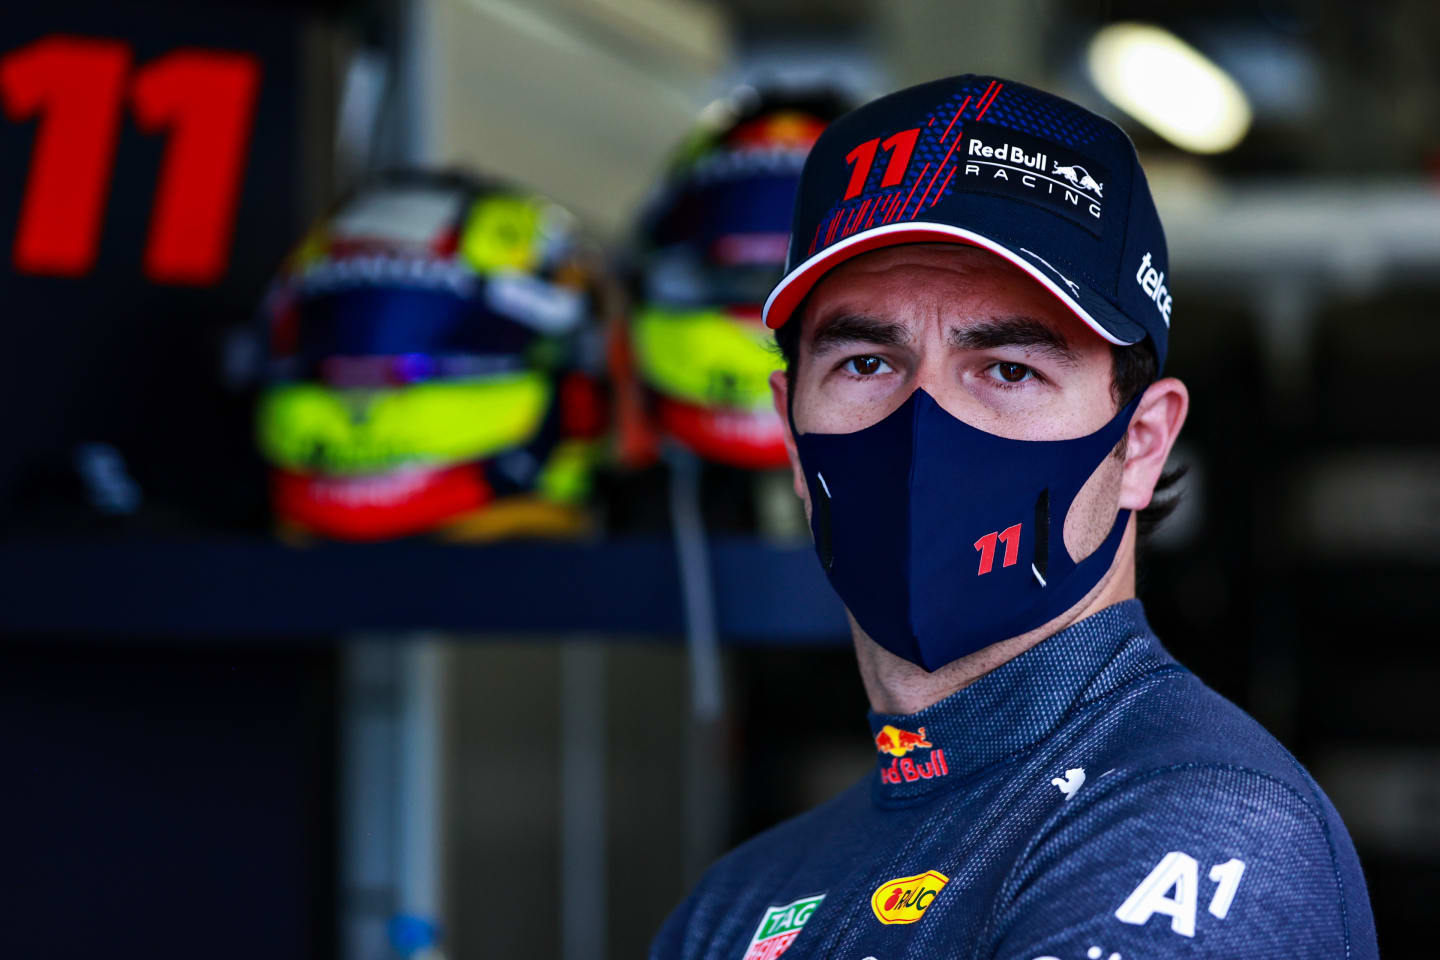 BAKU, AZERBAIJAN - JUNE 04: Sergio Perez of Mexico and Red Bull Racing prepares to drive in the garage during practice ahead of the F1 Grand Prix of Azerbaijan at Baku City Circuit on June 04, 2021 in Baku, Azerbaijan. (Photo by Mark Thompson/Getty Images)